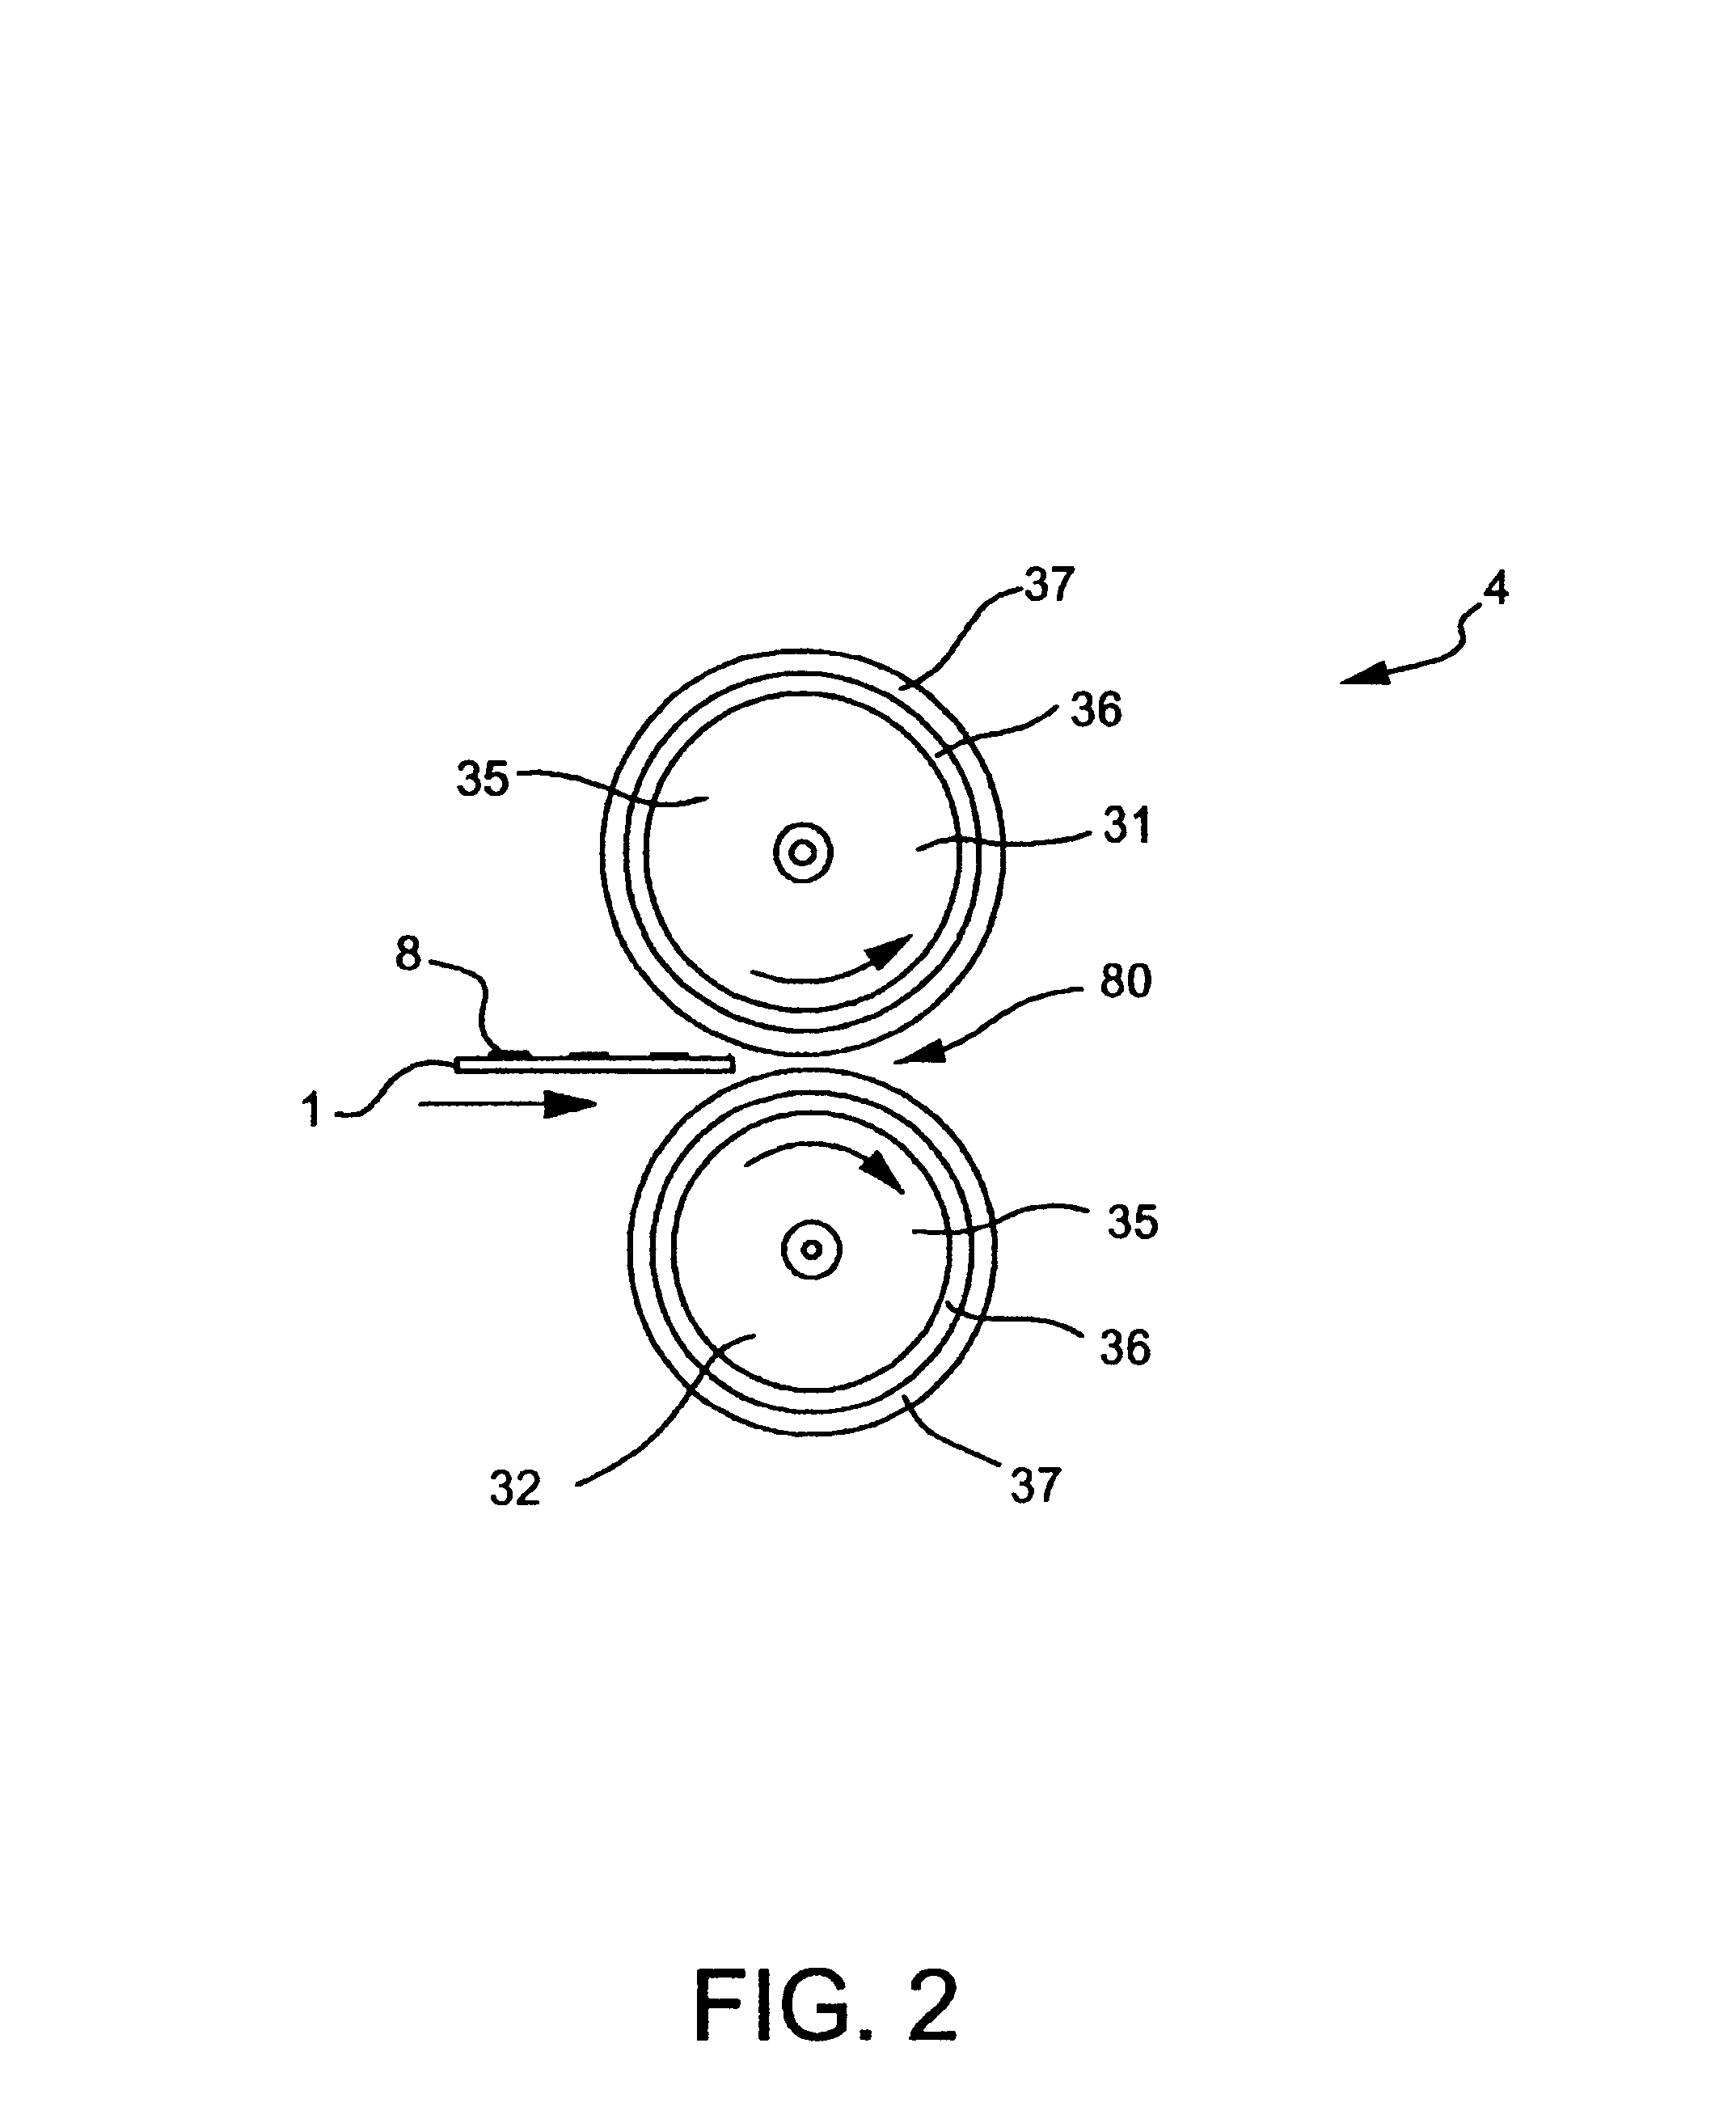 Fuser apparatus for adjusting gloss of a fused toner image and method for fusing a toner image to a receiver